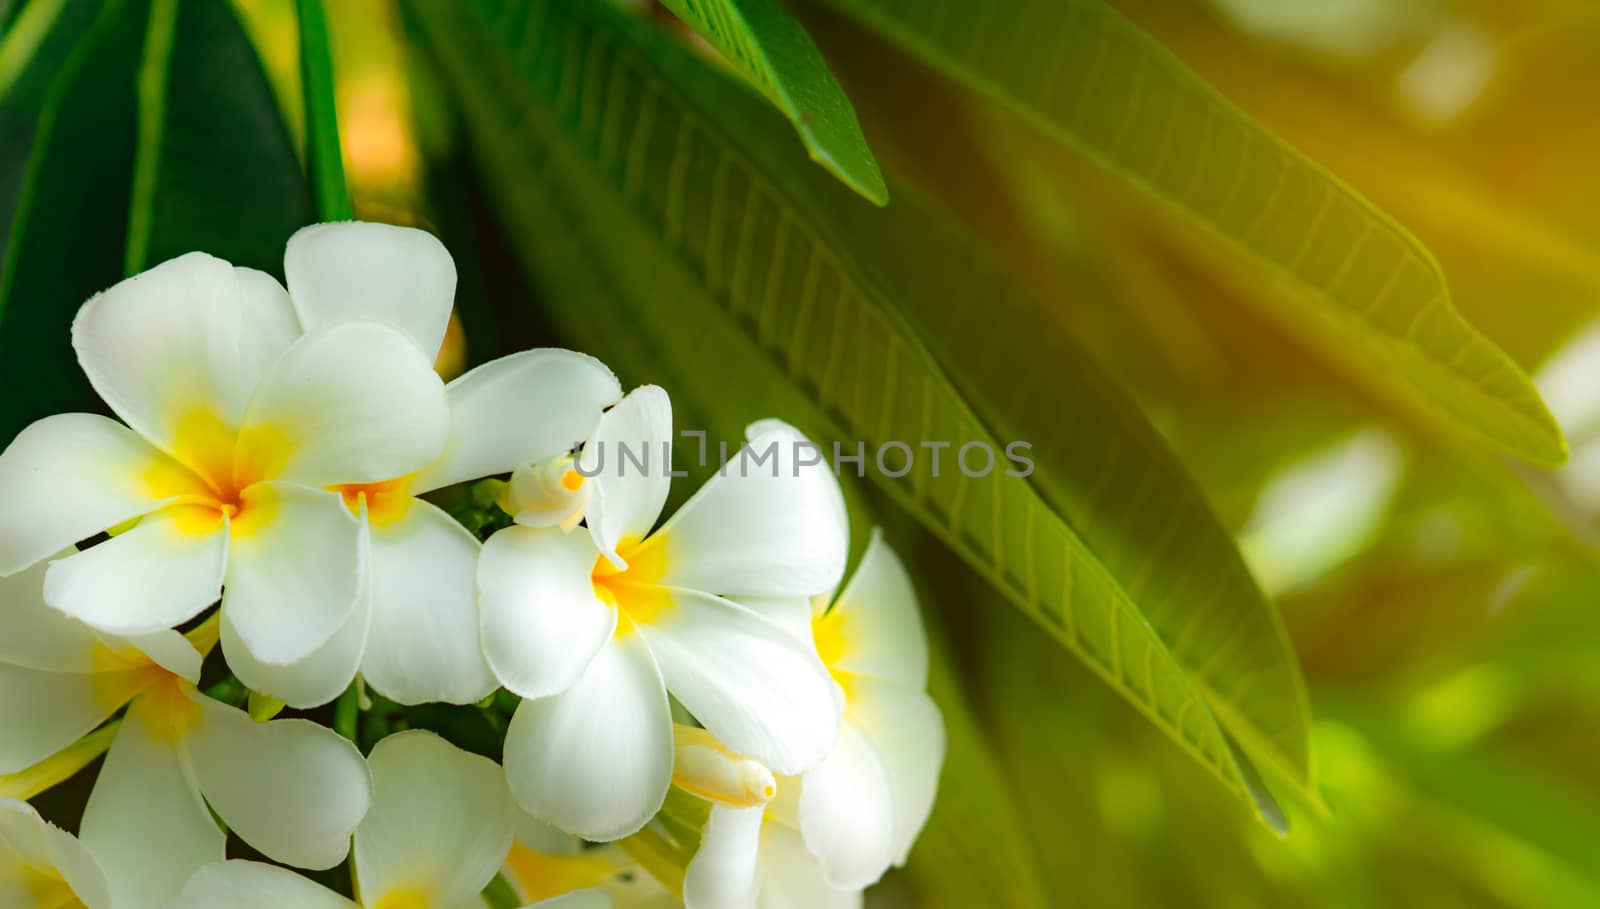 Frangipani flower (Plumeria alba) with green leaves on blurred background. White flowers with yellow at center. Health and spa background. Summer spa concept. Relax emotion. by Fahroni